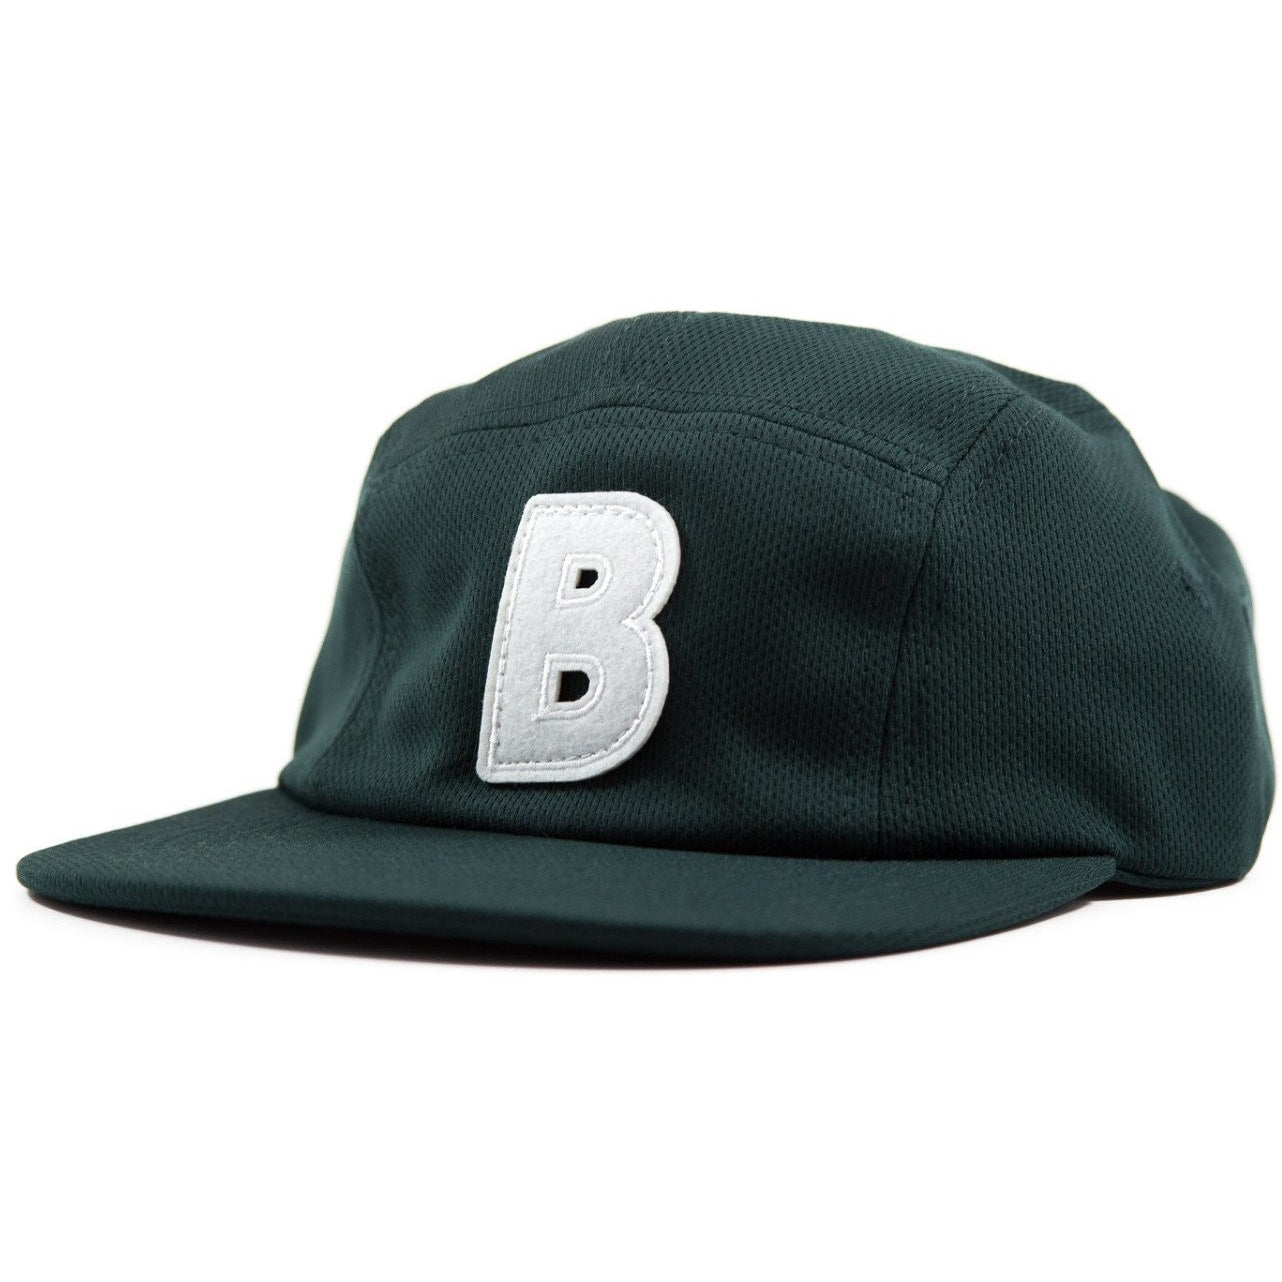 5-panel unconstructed mesh polyester green hat featuring BLED letter logo felt patch on the front and BLED logo embroidered on the back with adjustable strap, skateboards, hype, skate, streetwear